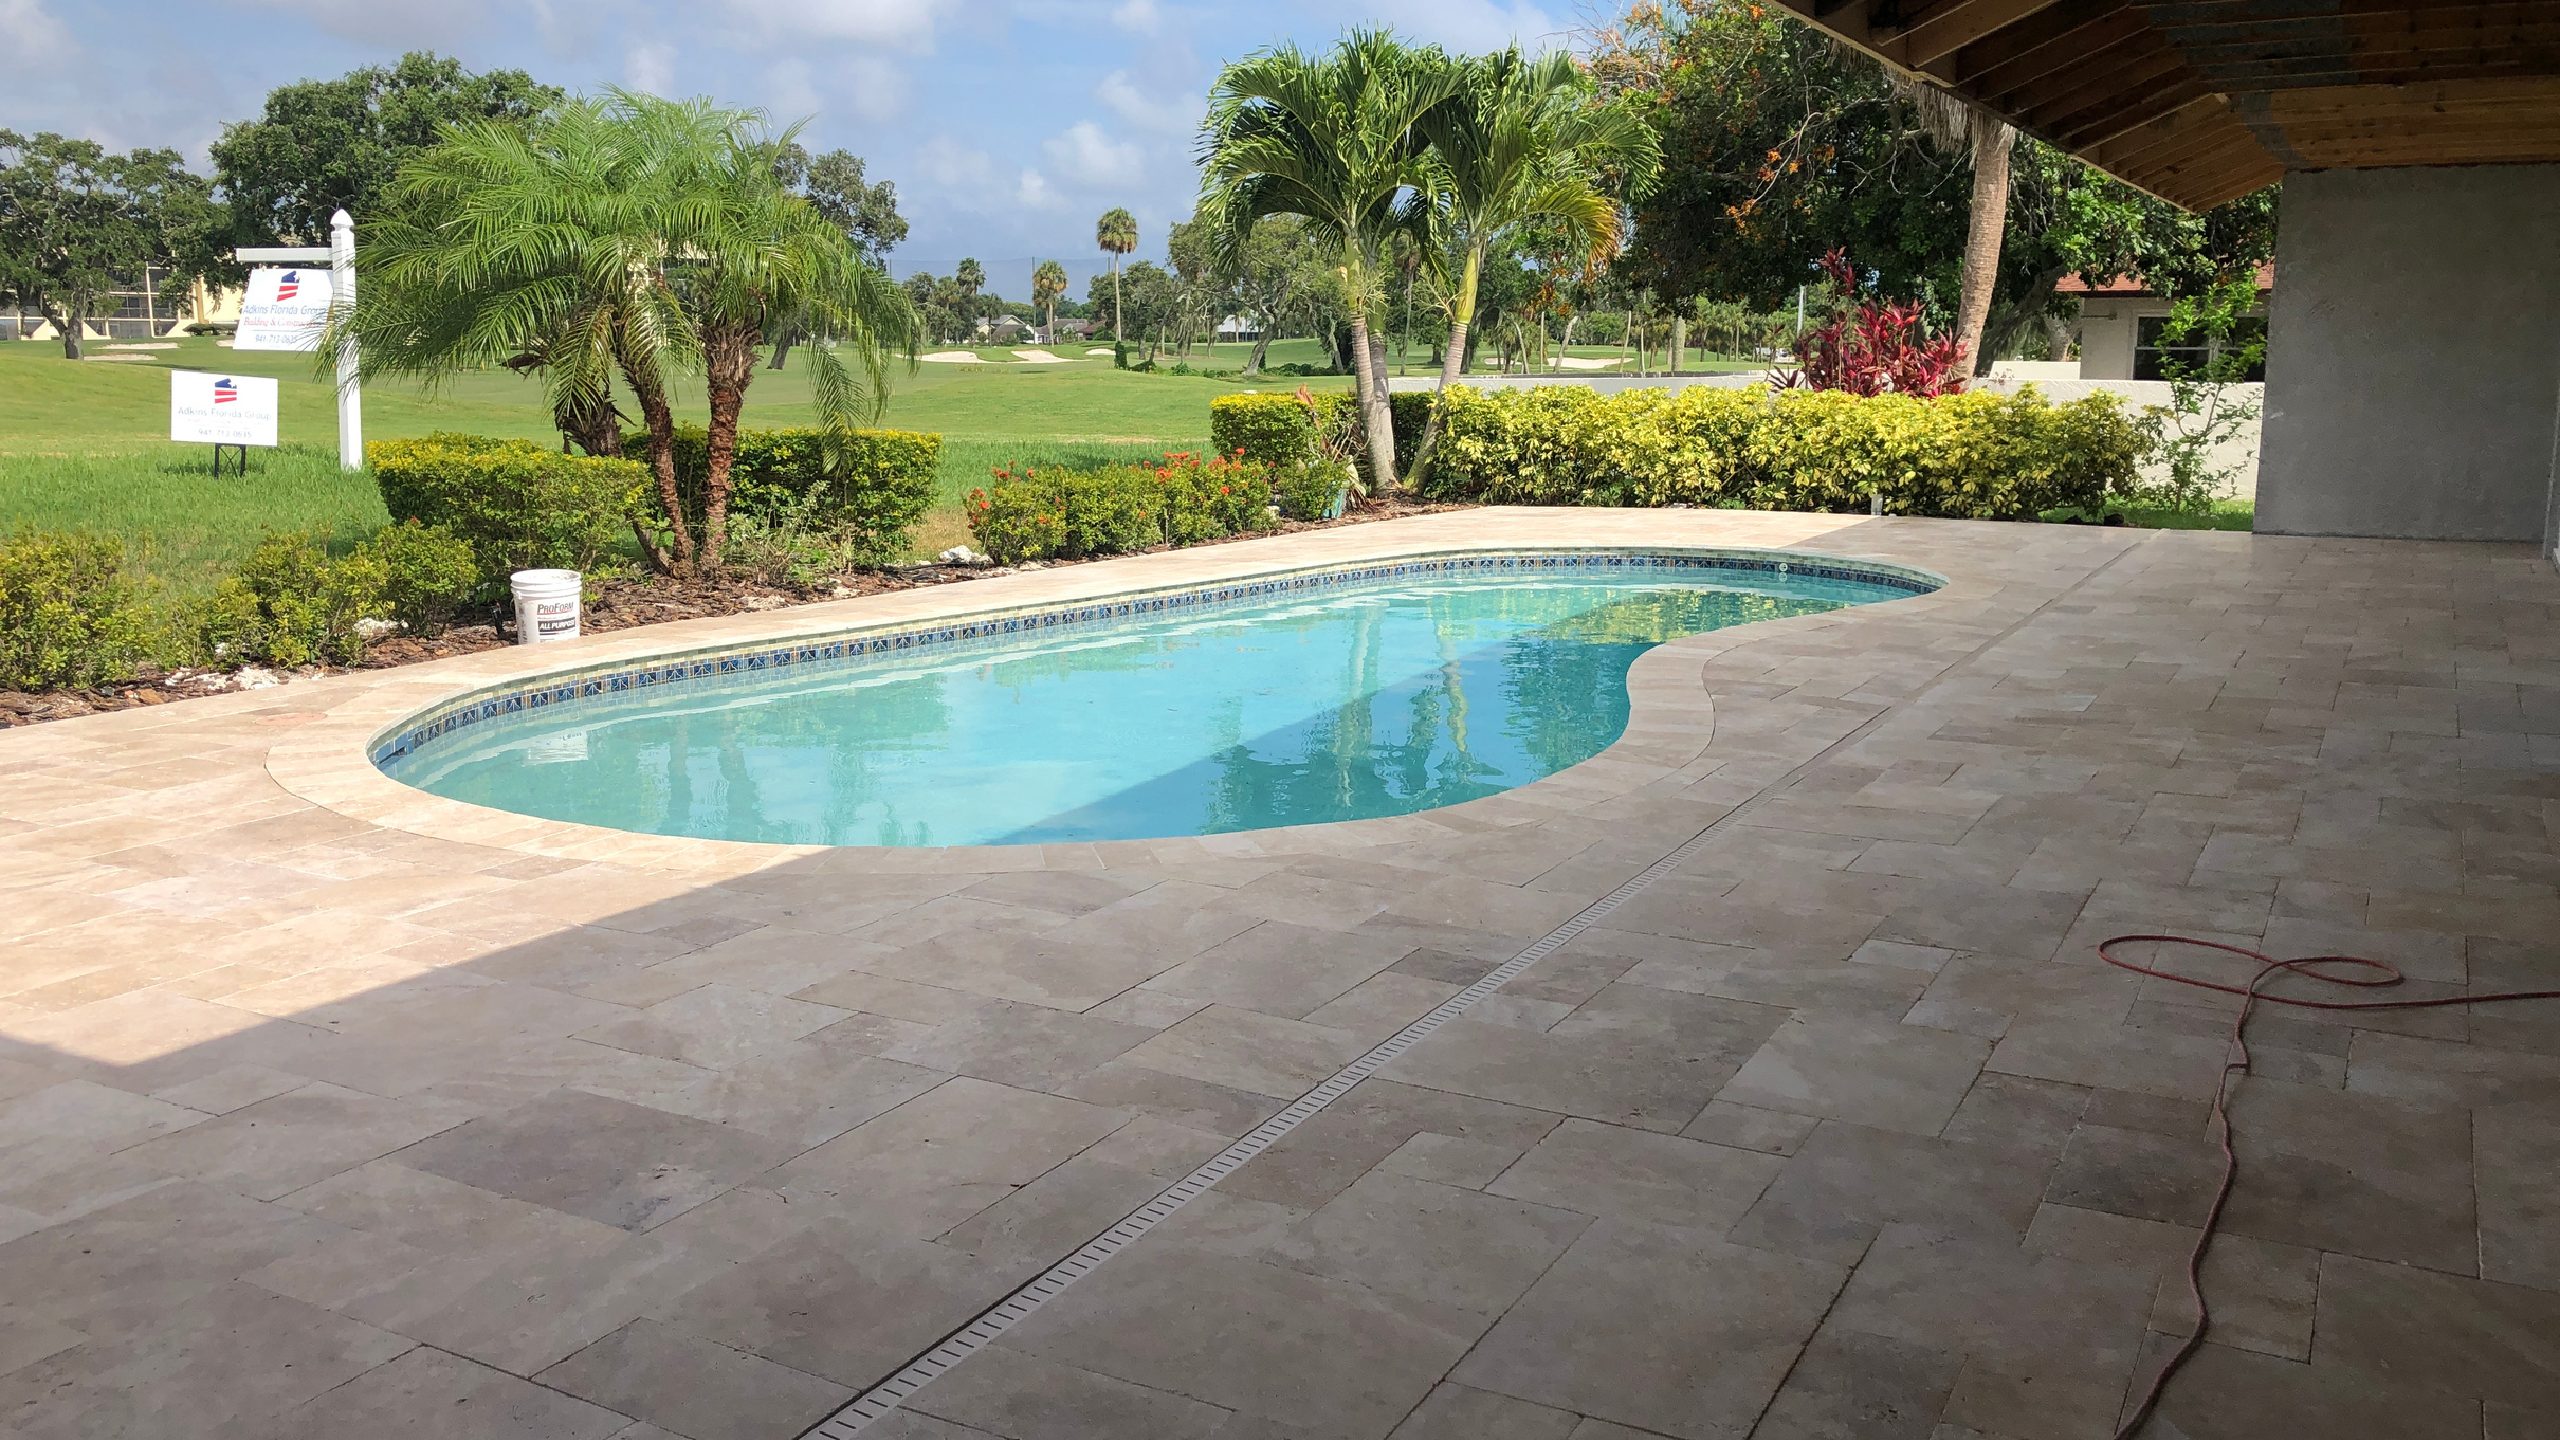 3 Things You Should Know Before Getting a Custom Pool